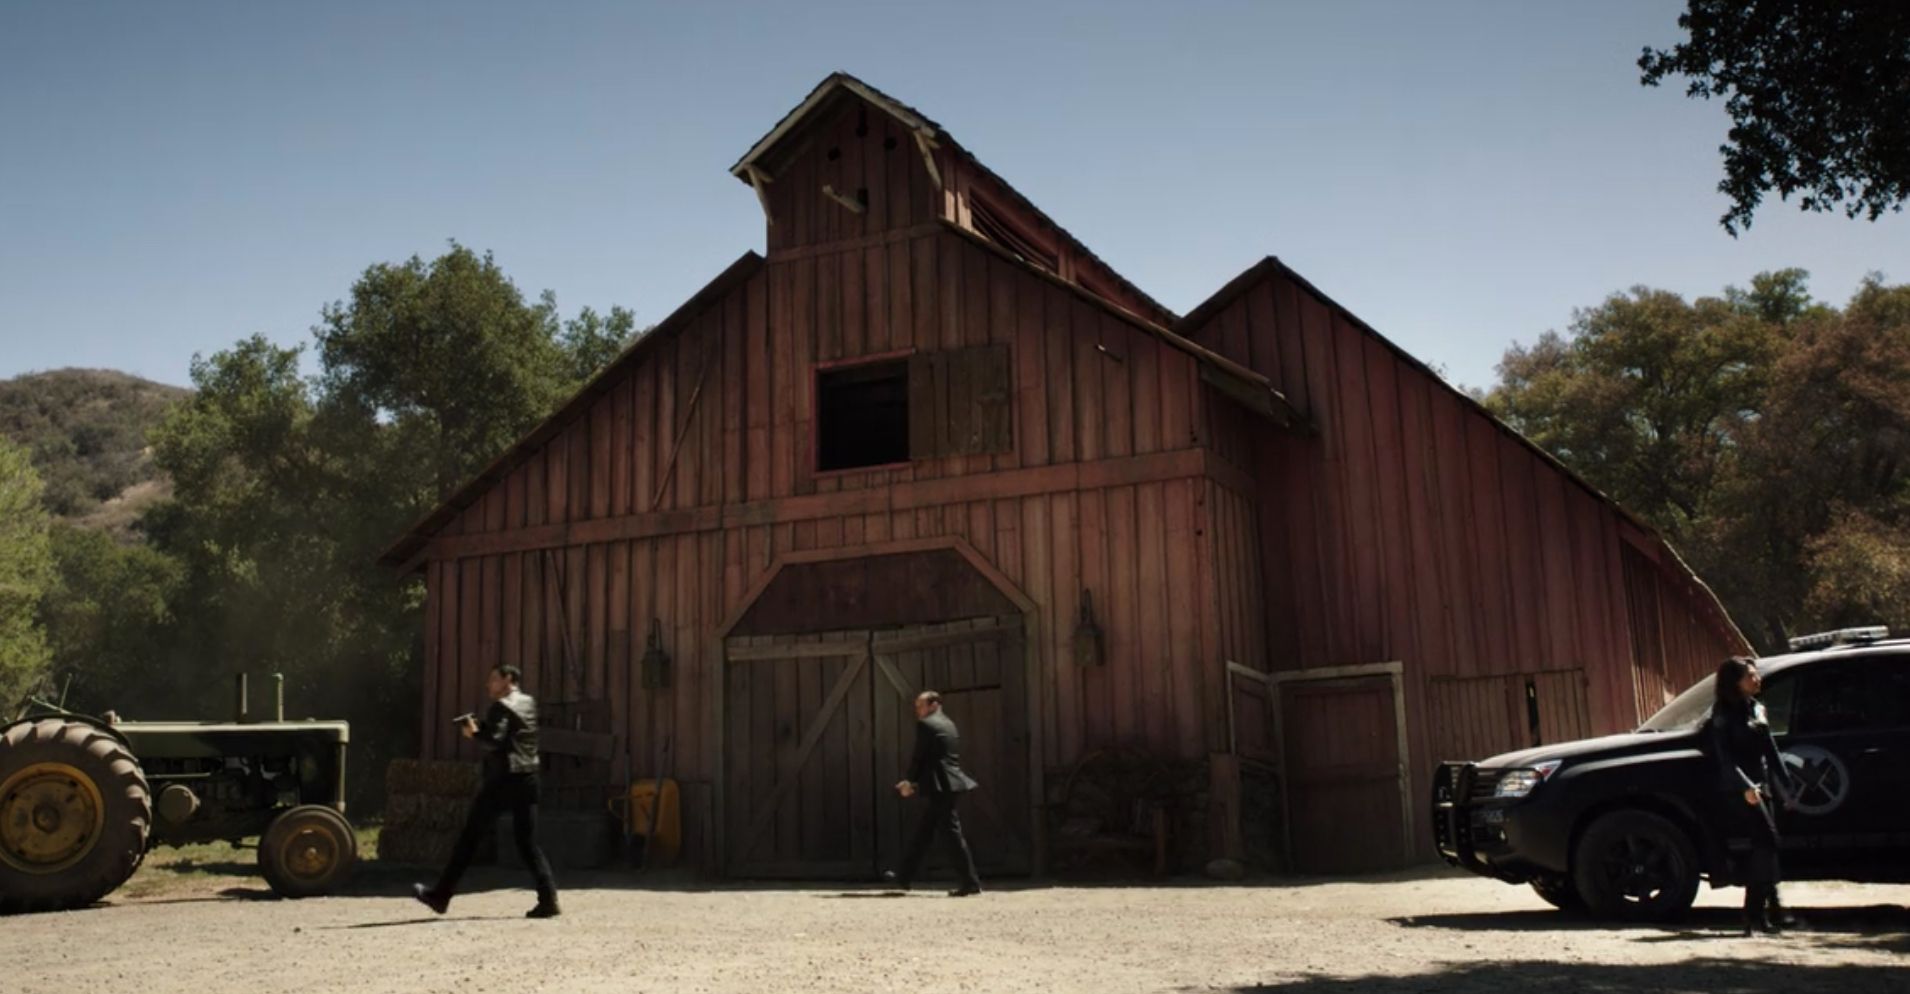 The Barn in Agents of SHIELD episode FZZT